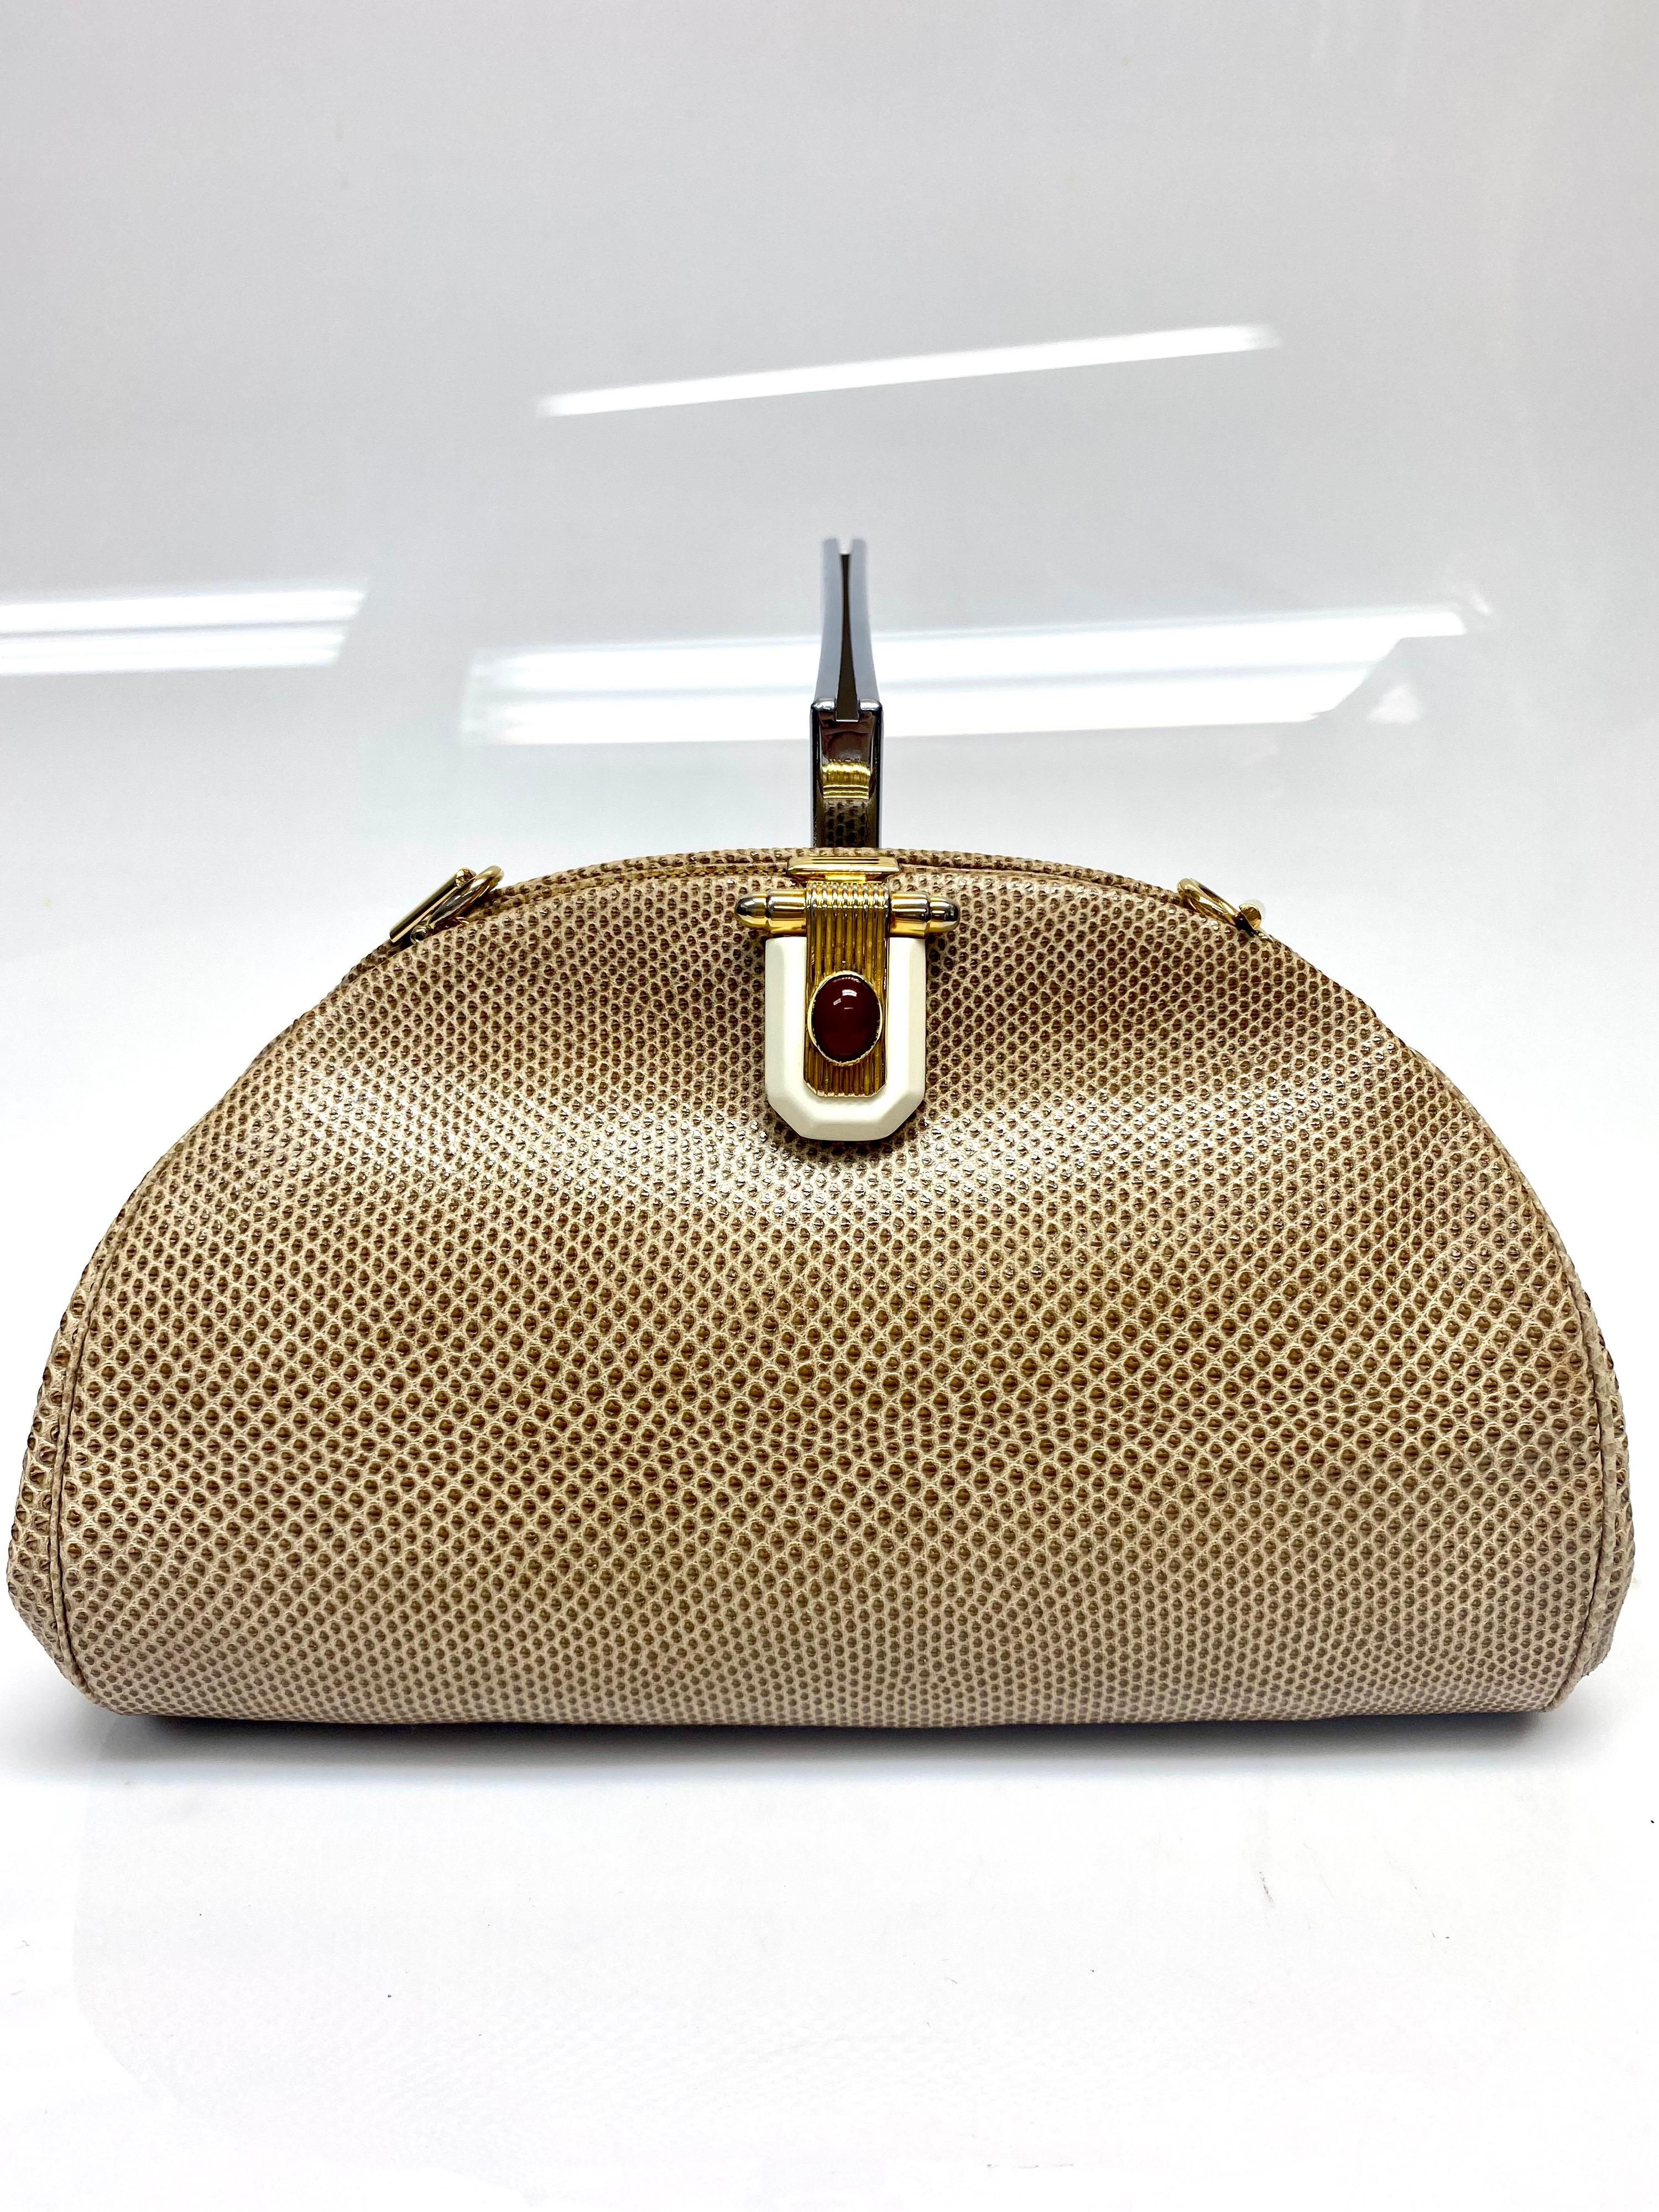 Judith Leiber Tan Karung Snake Handbag Clutch with Stone Buckle Front. A beautiful piece by the talented Judith Leiber, this karung snake clutch/handbag is a perfect bag for any occasion. Featuring ivory, red and gold hardware and a removable strap.